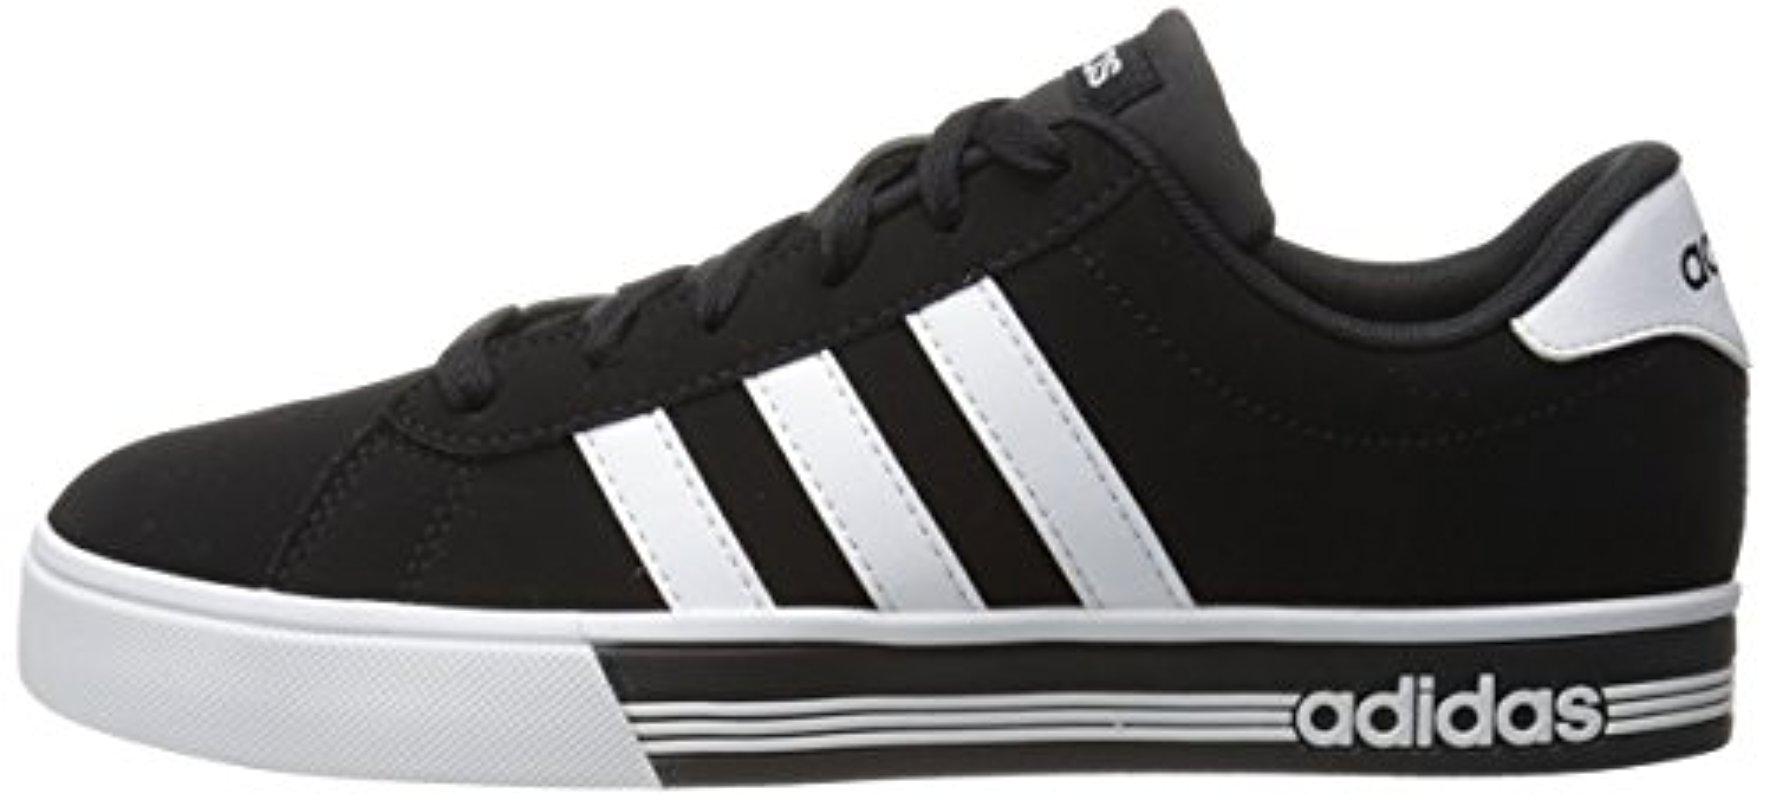 Adidas Daily Team Black Online Sale, UP TO 65% OFF